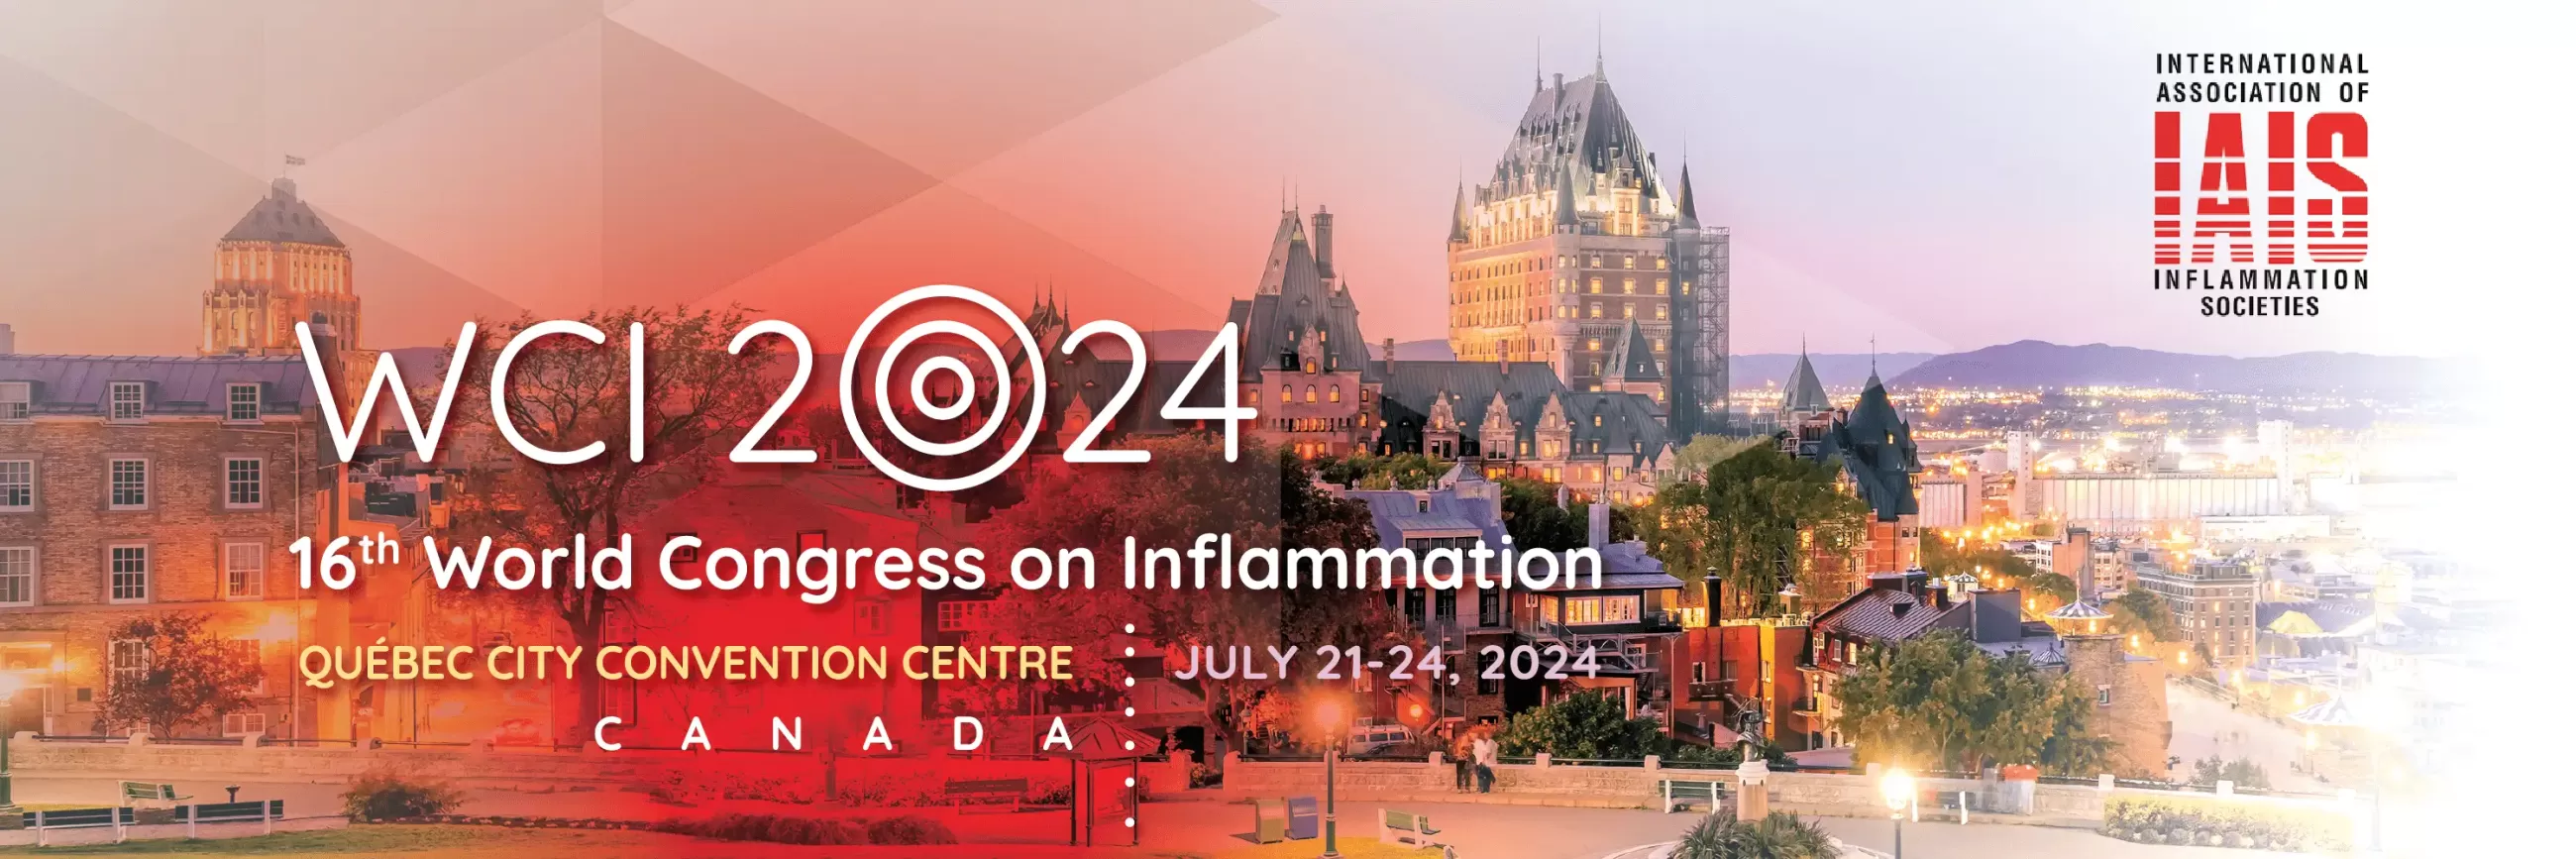 16th World Congress on Inflammation, Québec City Convention Centre, July 21-24, 2024.